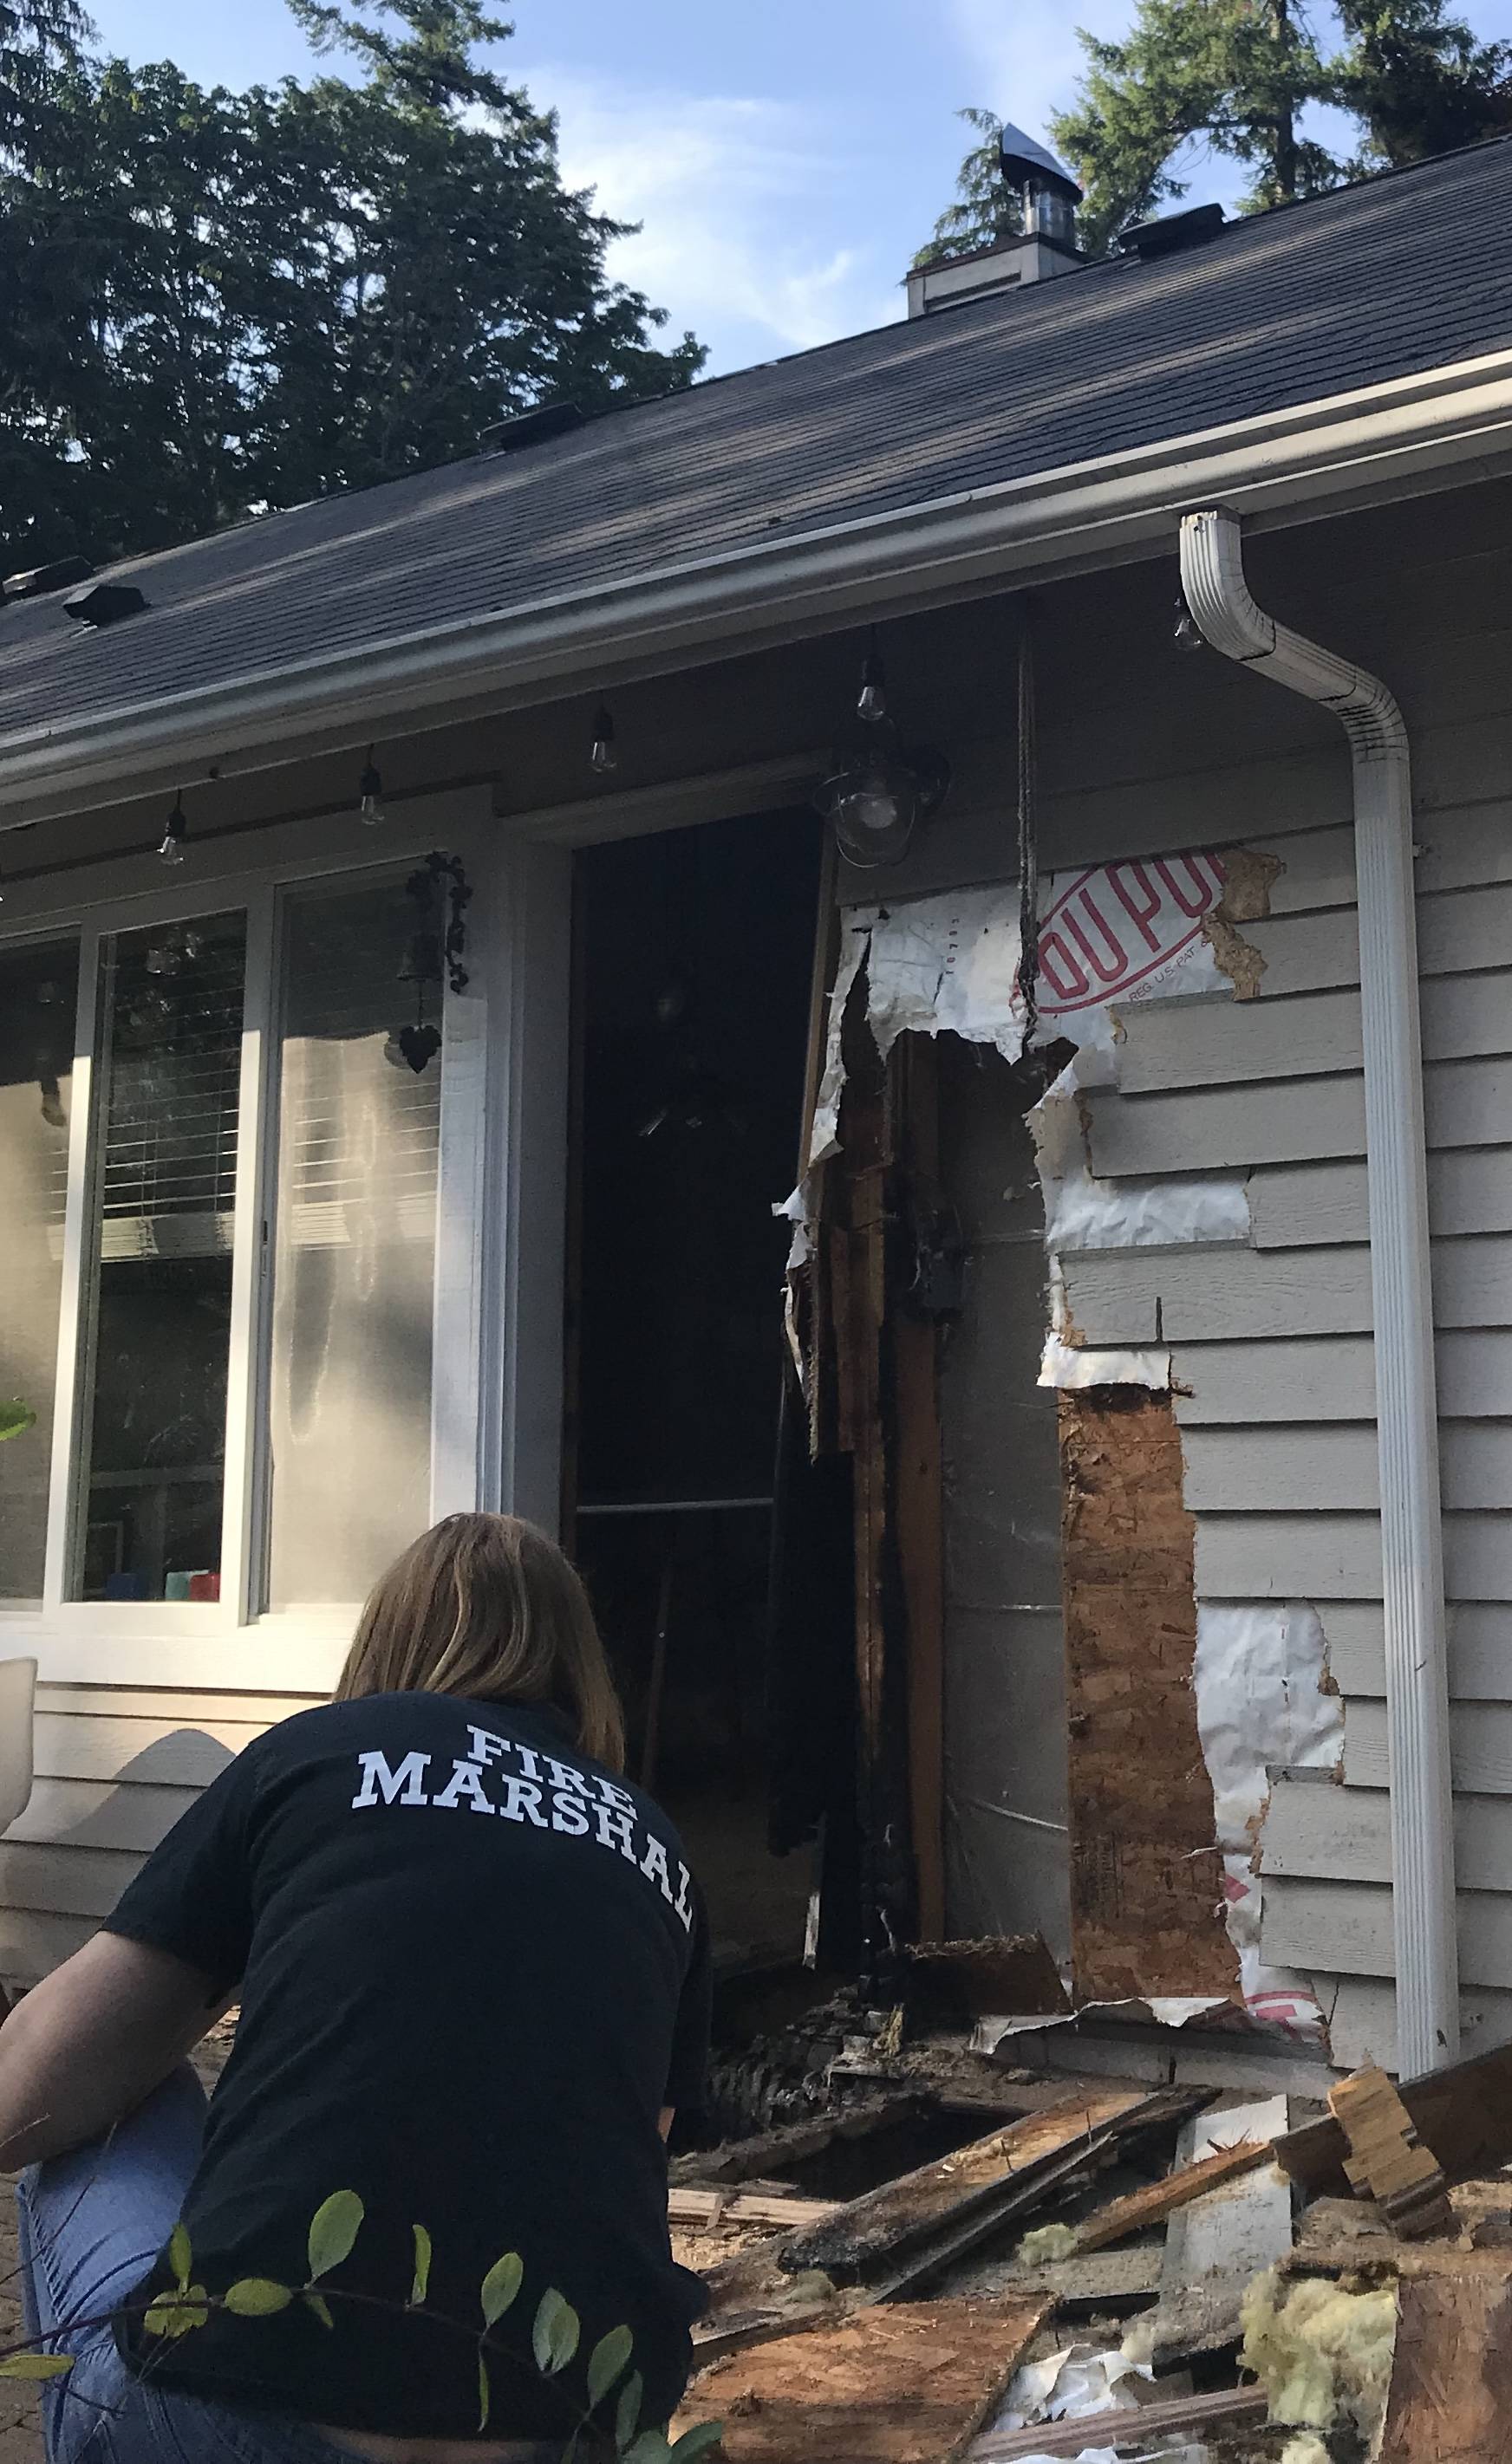 Deputy Fire Marshal Kristi Wlodarchak examines the debris from a fire, stopped before it caused more damage due to a combination of technology and fast firefighter response, at a Kingston-area home Sunday evening. Photo courtesy Poulsbo Fire Department